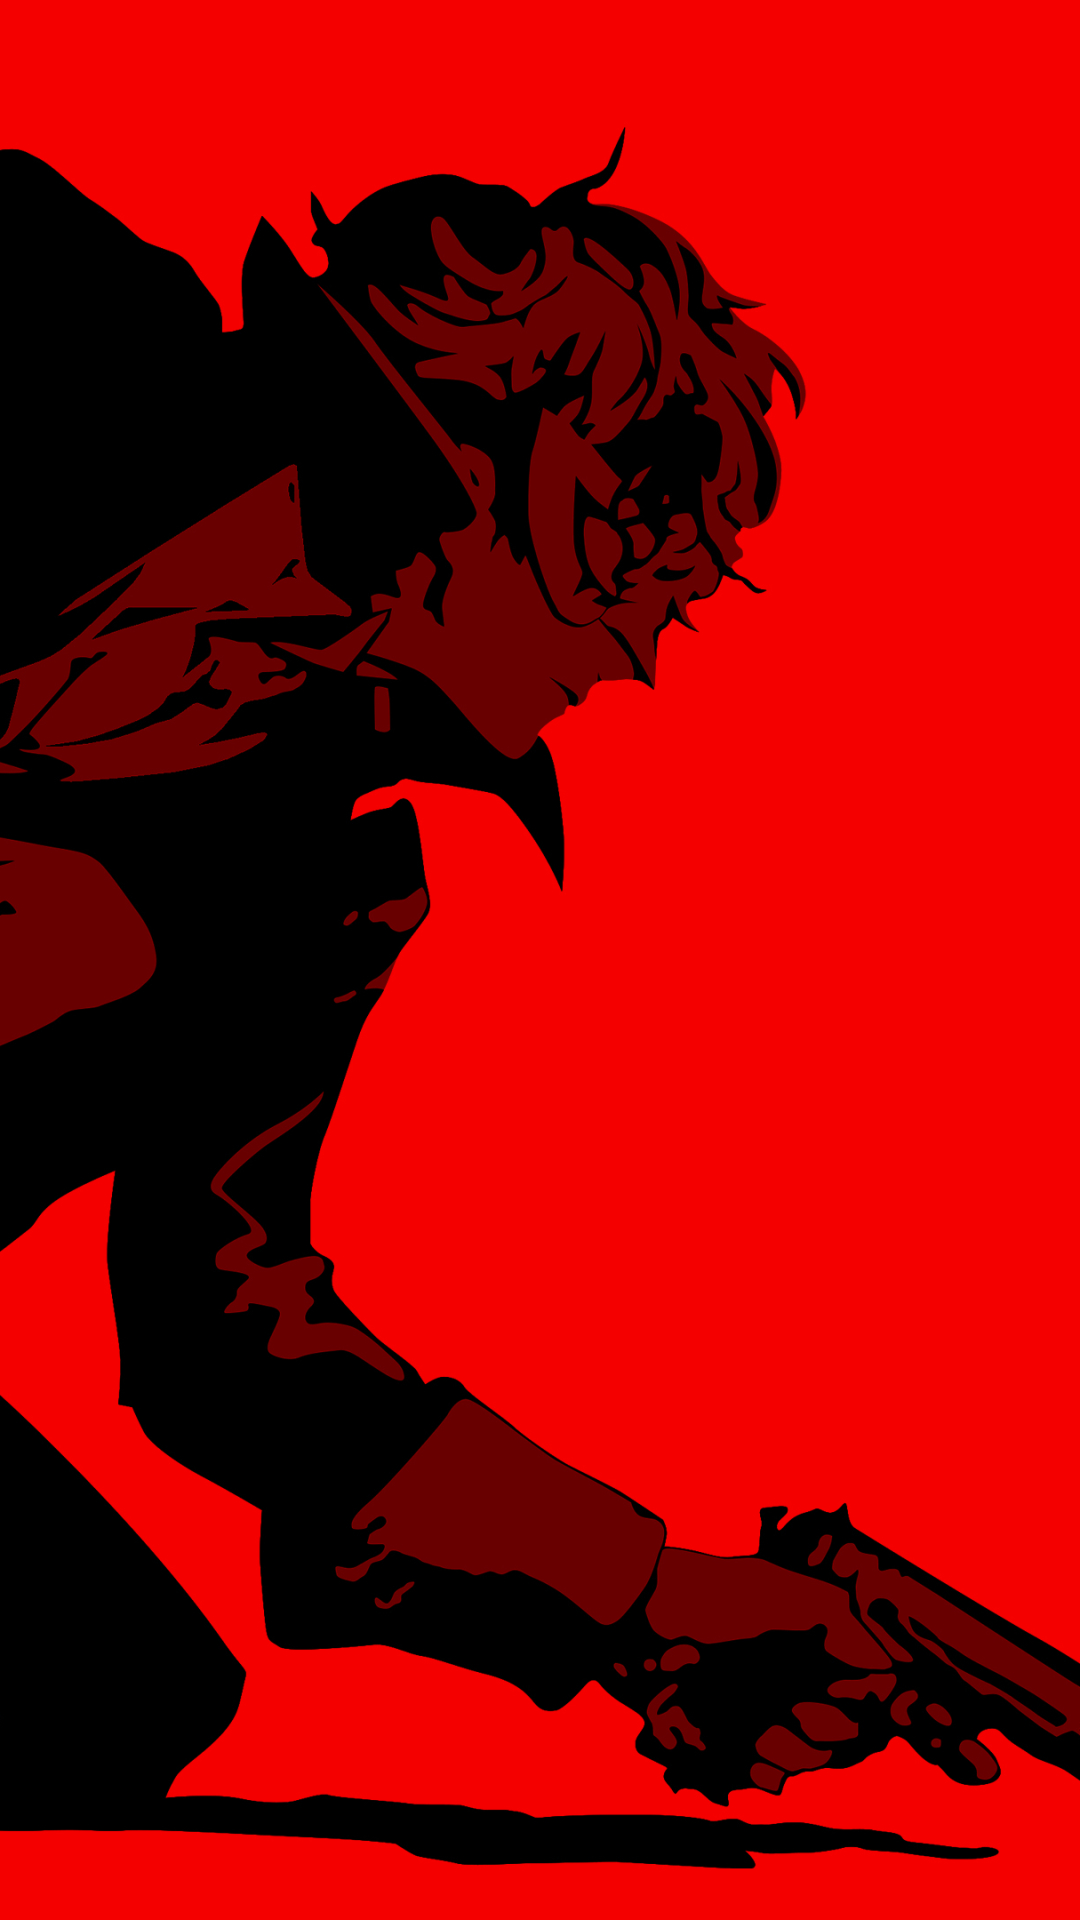 Persona 5 wallpapers  backgrounds for your desktop or mobile  Pocket  Tactics